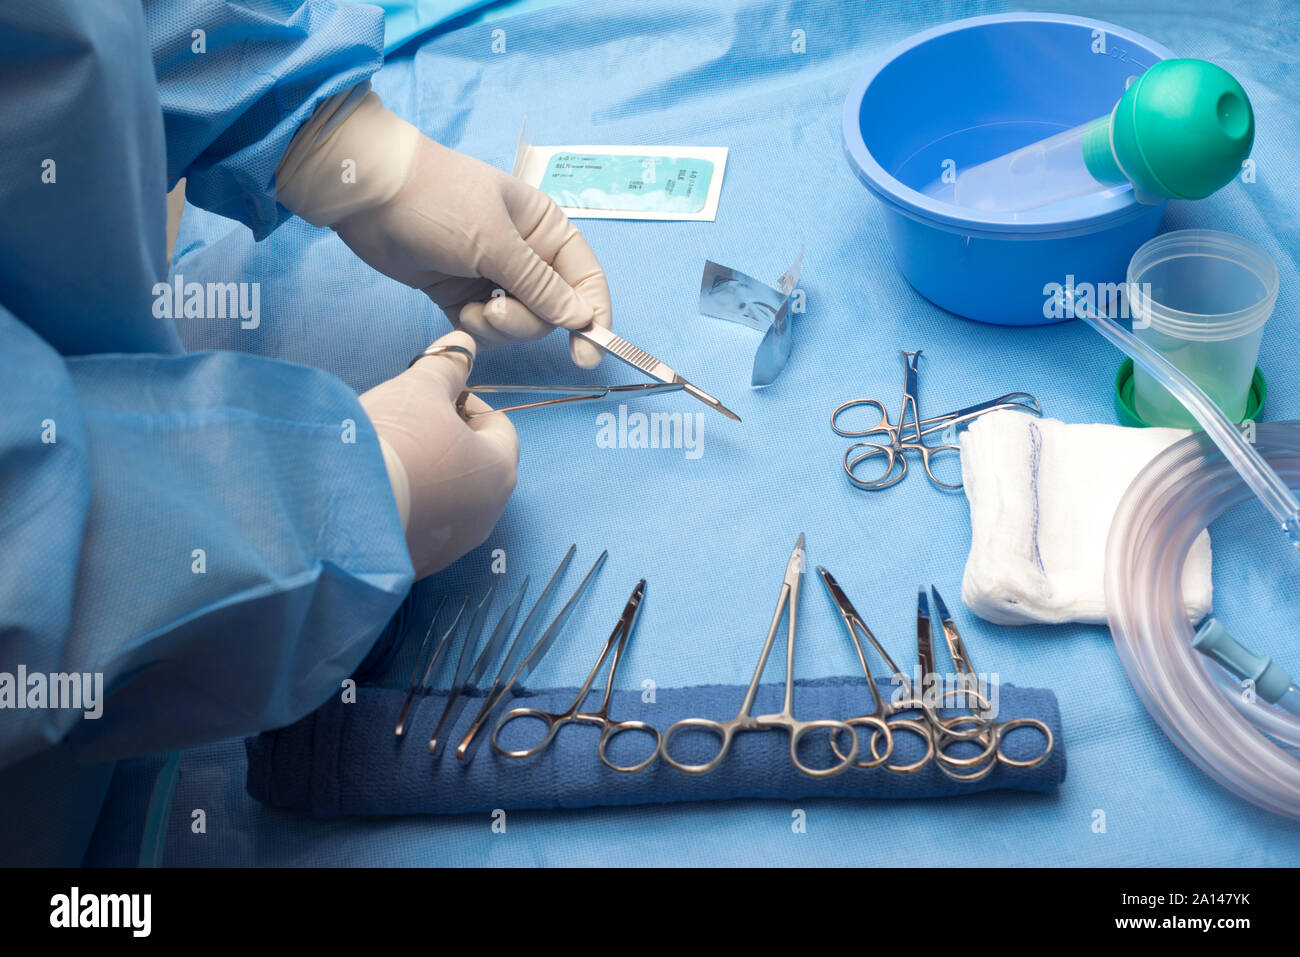 Surgical technician loads scalpel with surgical blade on sterile table. Stock Photo